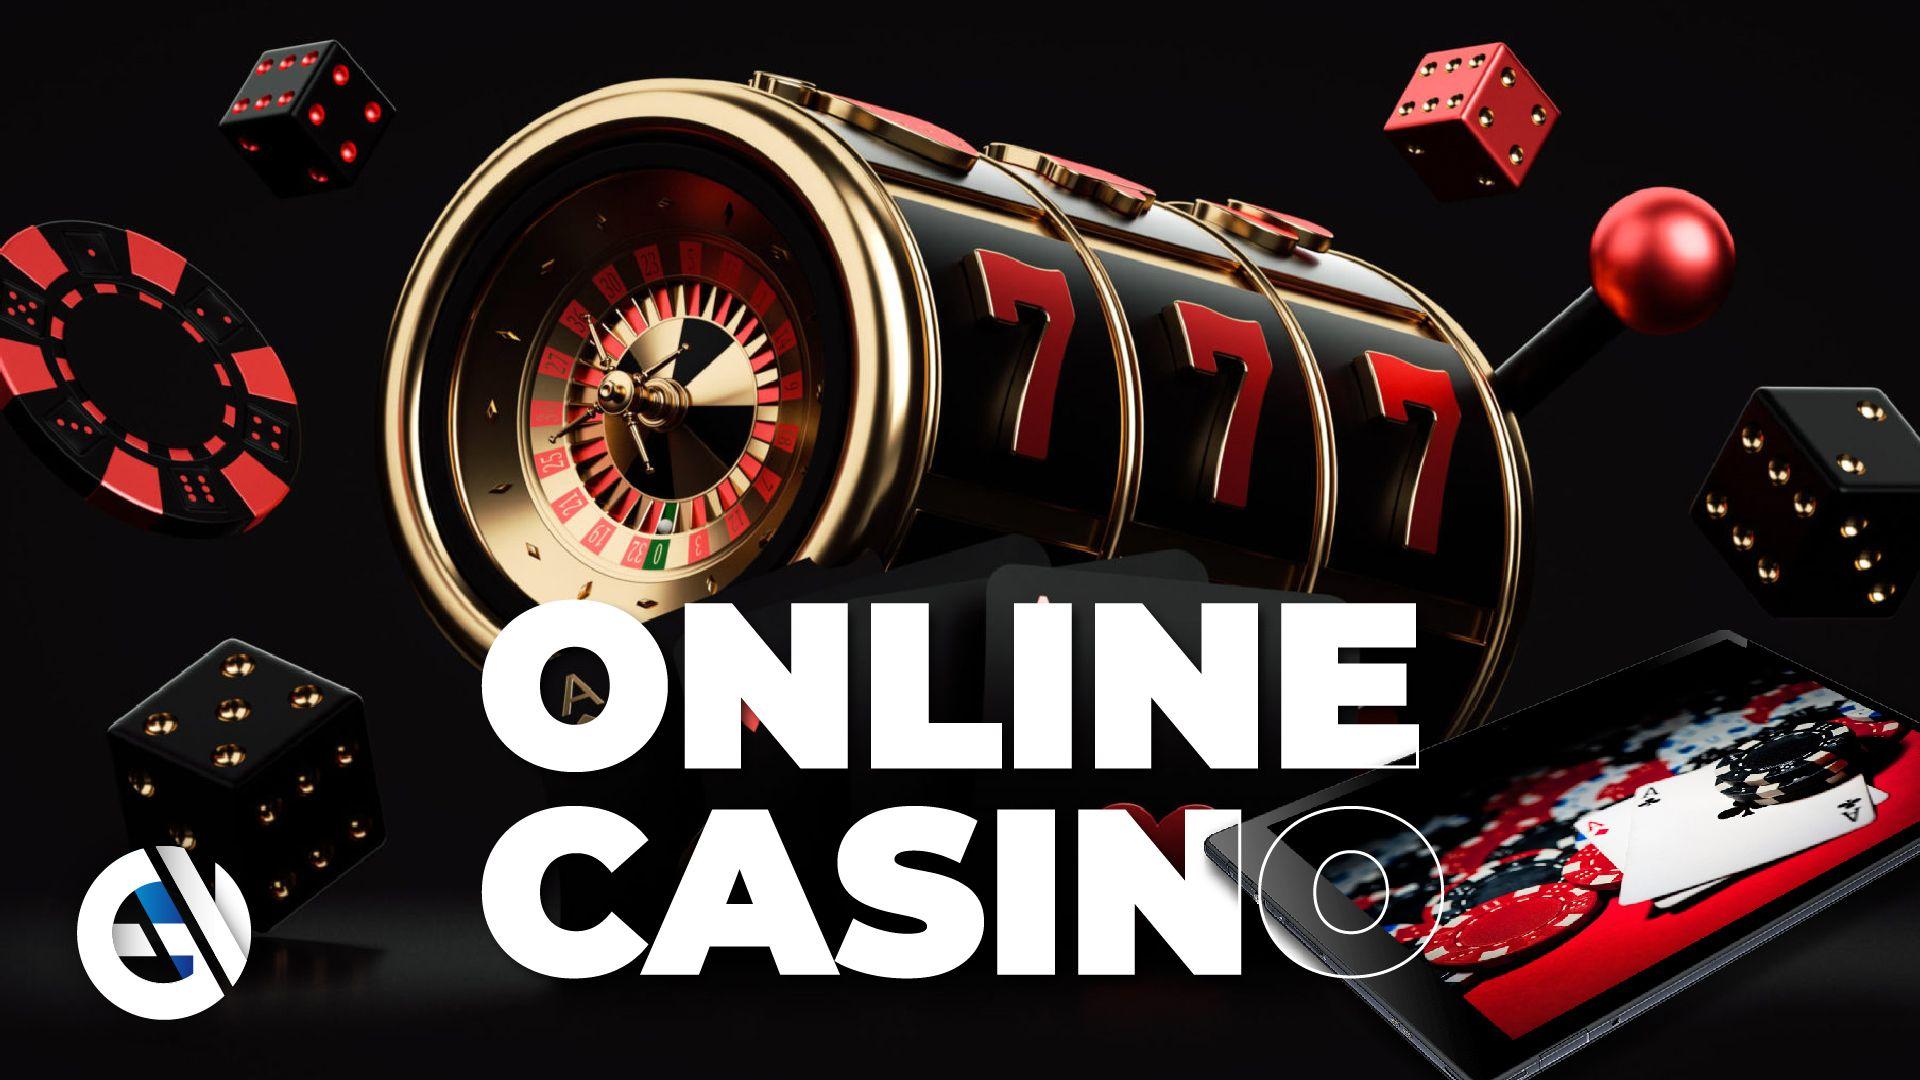 International Online Casino Market Analysis: Growth Opportunities and Challenges